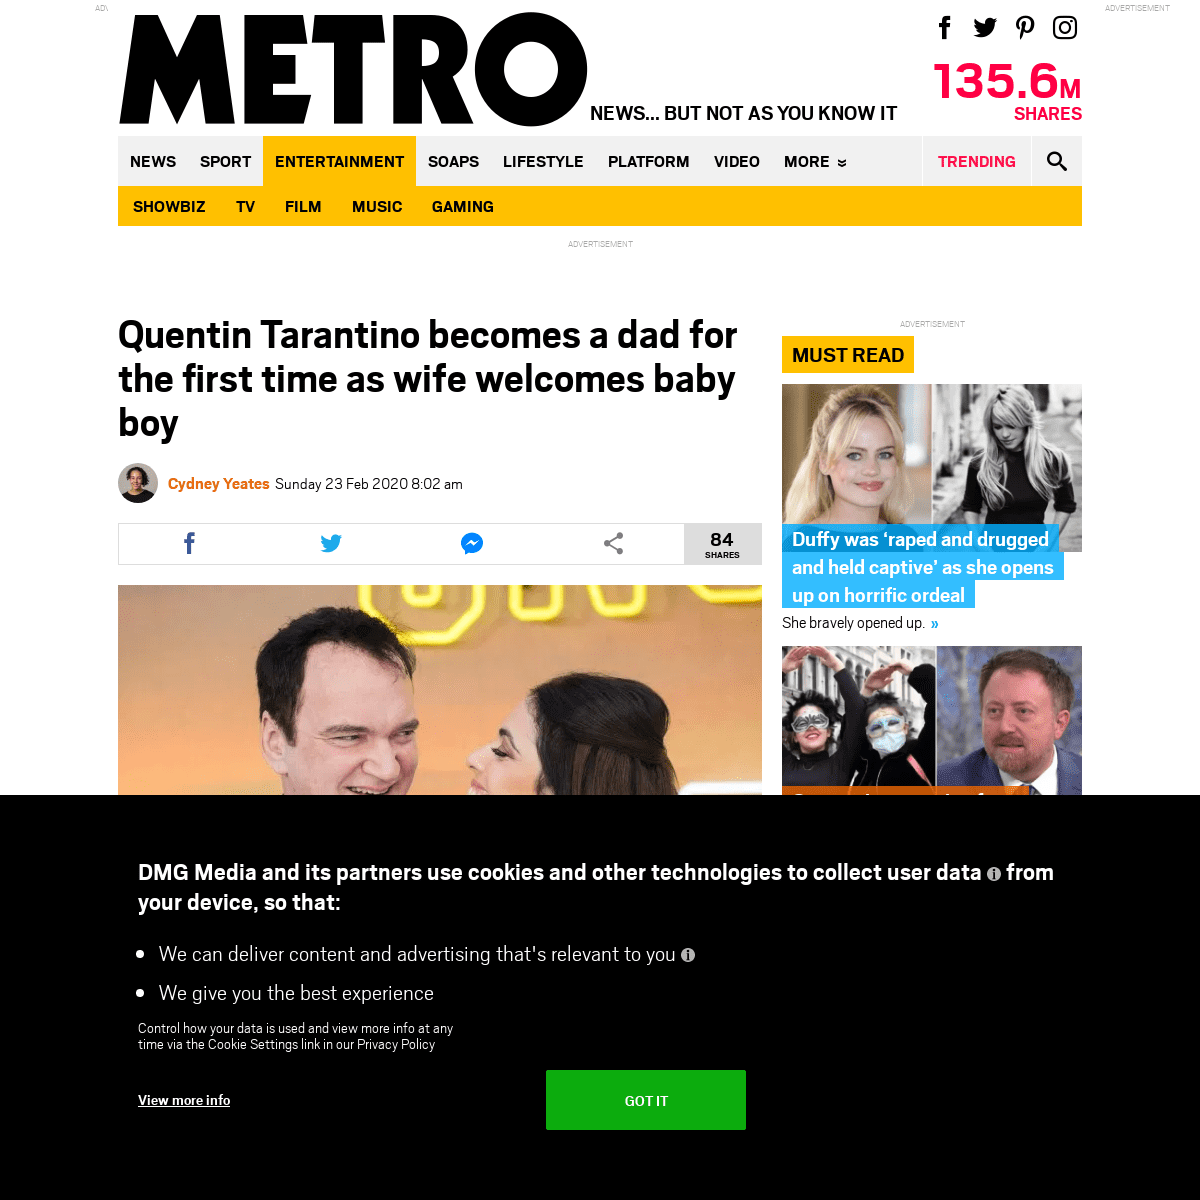 A complete backup of metro.co.uk/2020/02/23/quentin-tarantino-becomes-father-first-time-wife-welcomes-baby-boy-12286450/